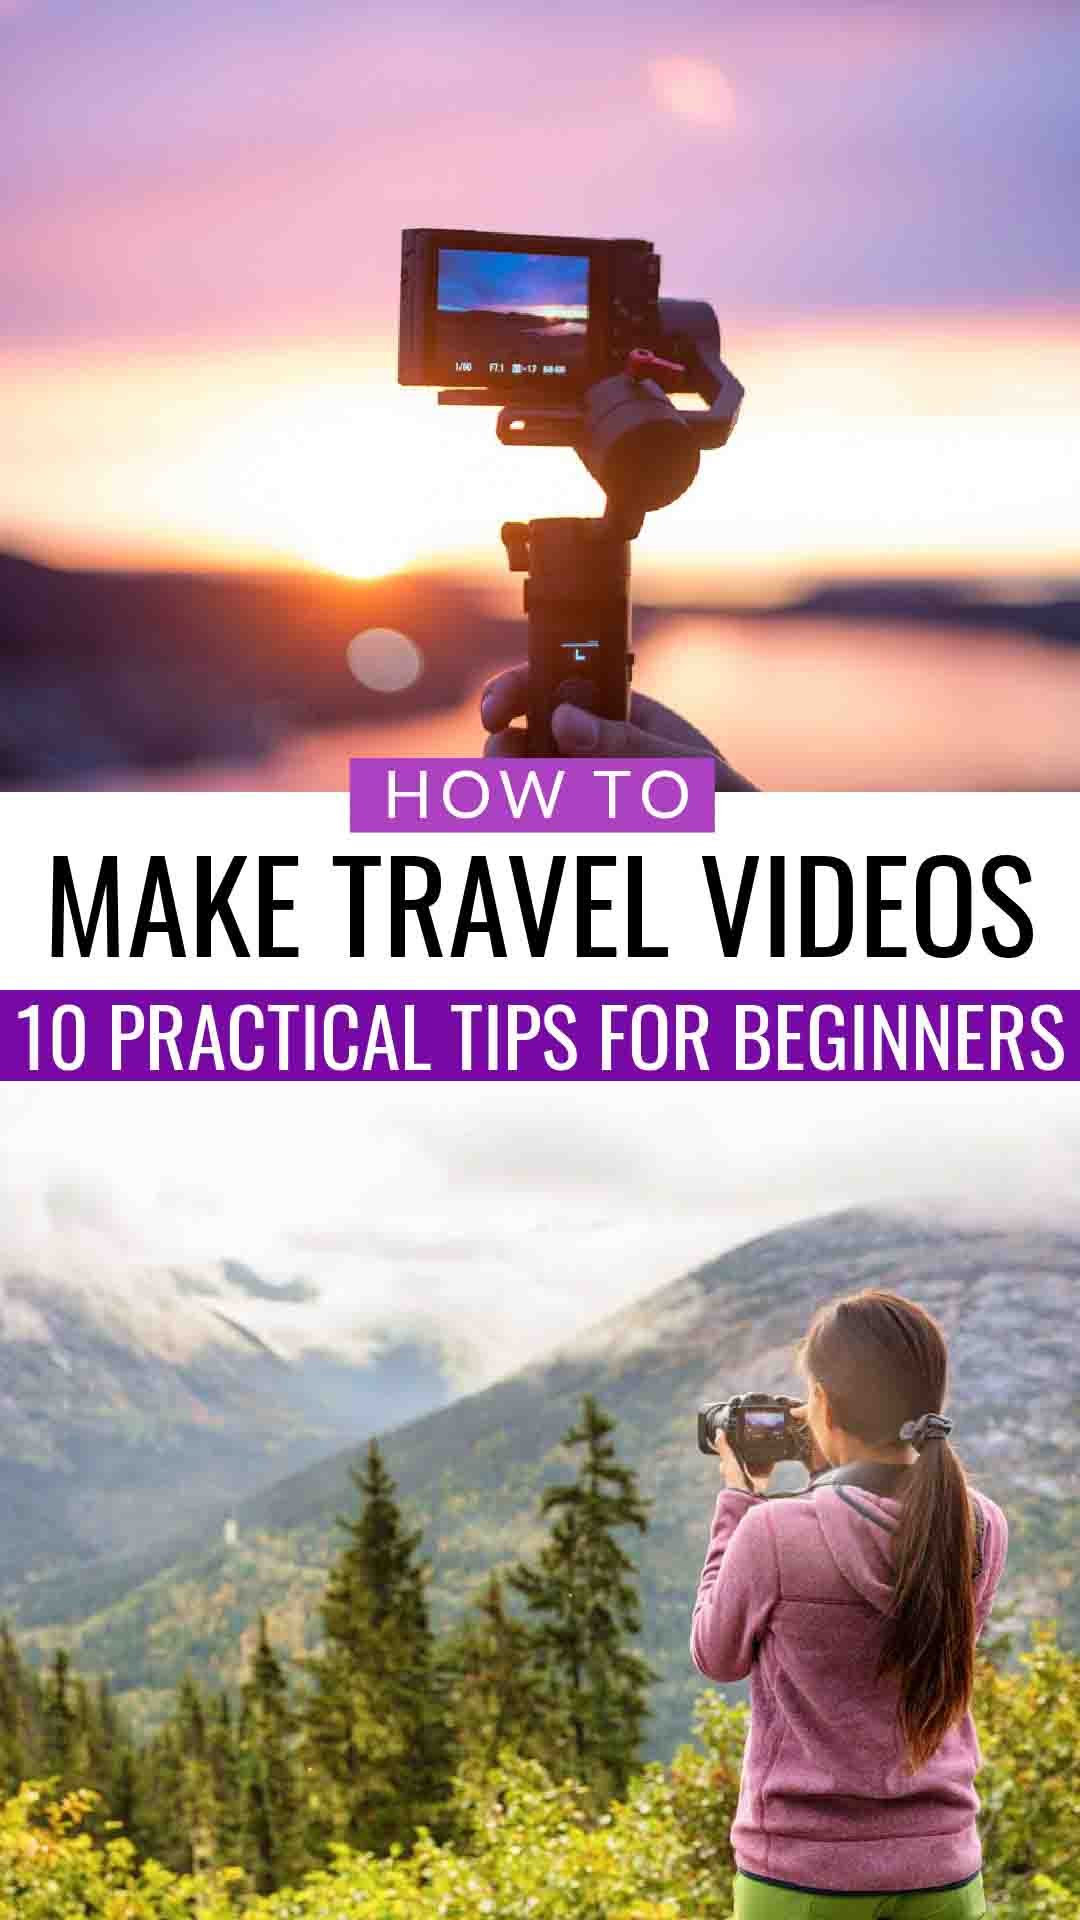 How to make travel videos collage with camera on stabilizer capturing coloful sky at twilight and photo of woman recording Alaskan mountain landscape with camera